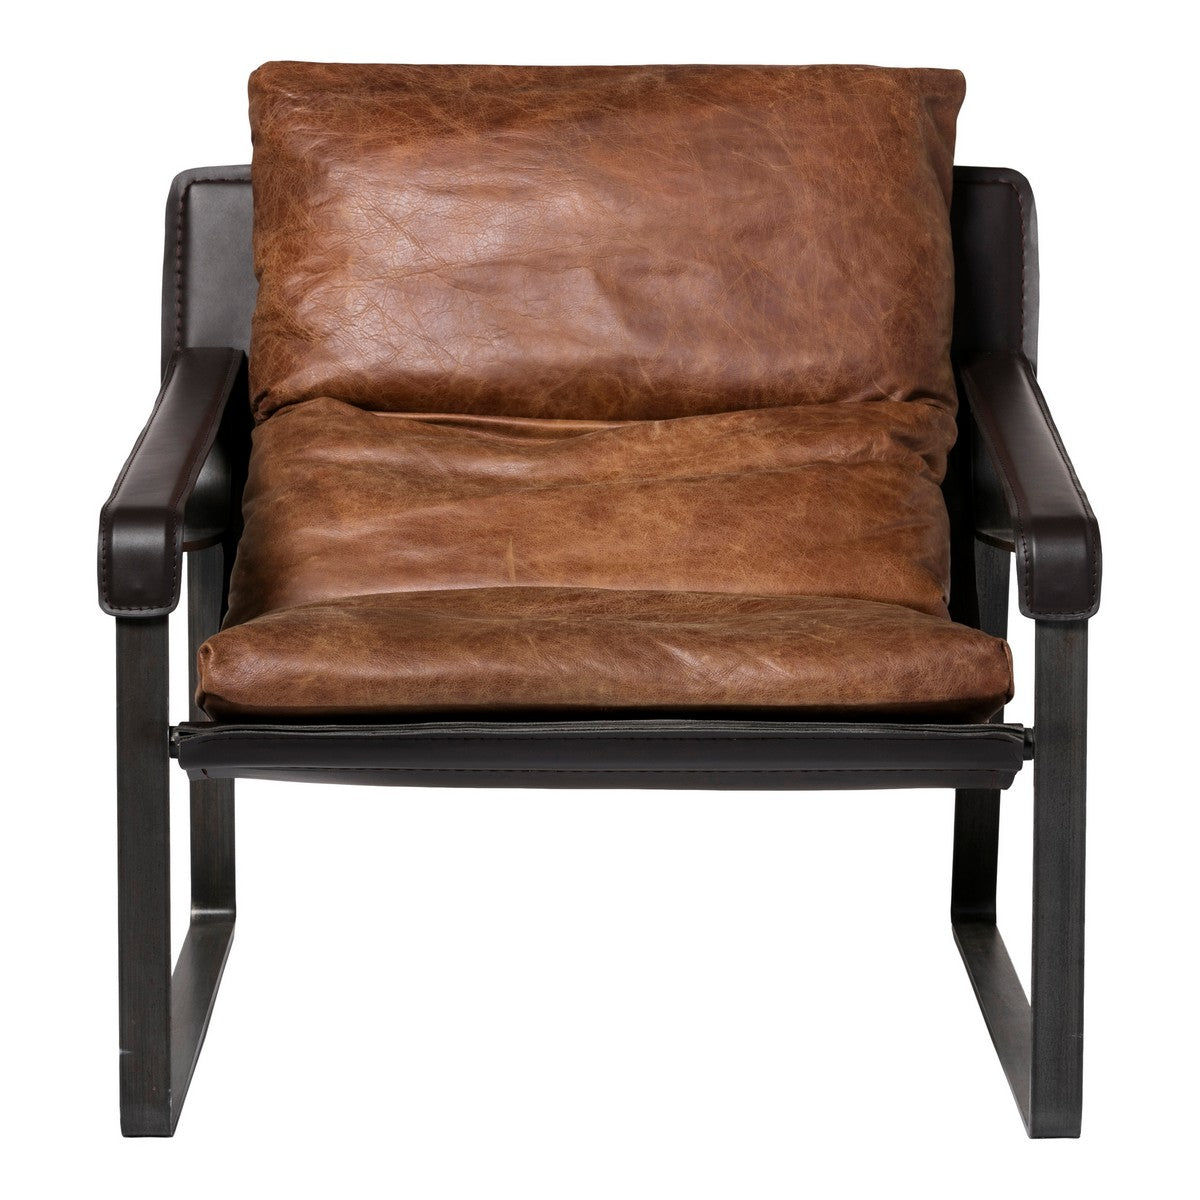 Moe's Home Collection Connor Club Chair - Brown - PK-1044-14